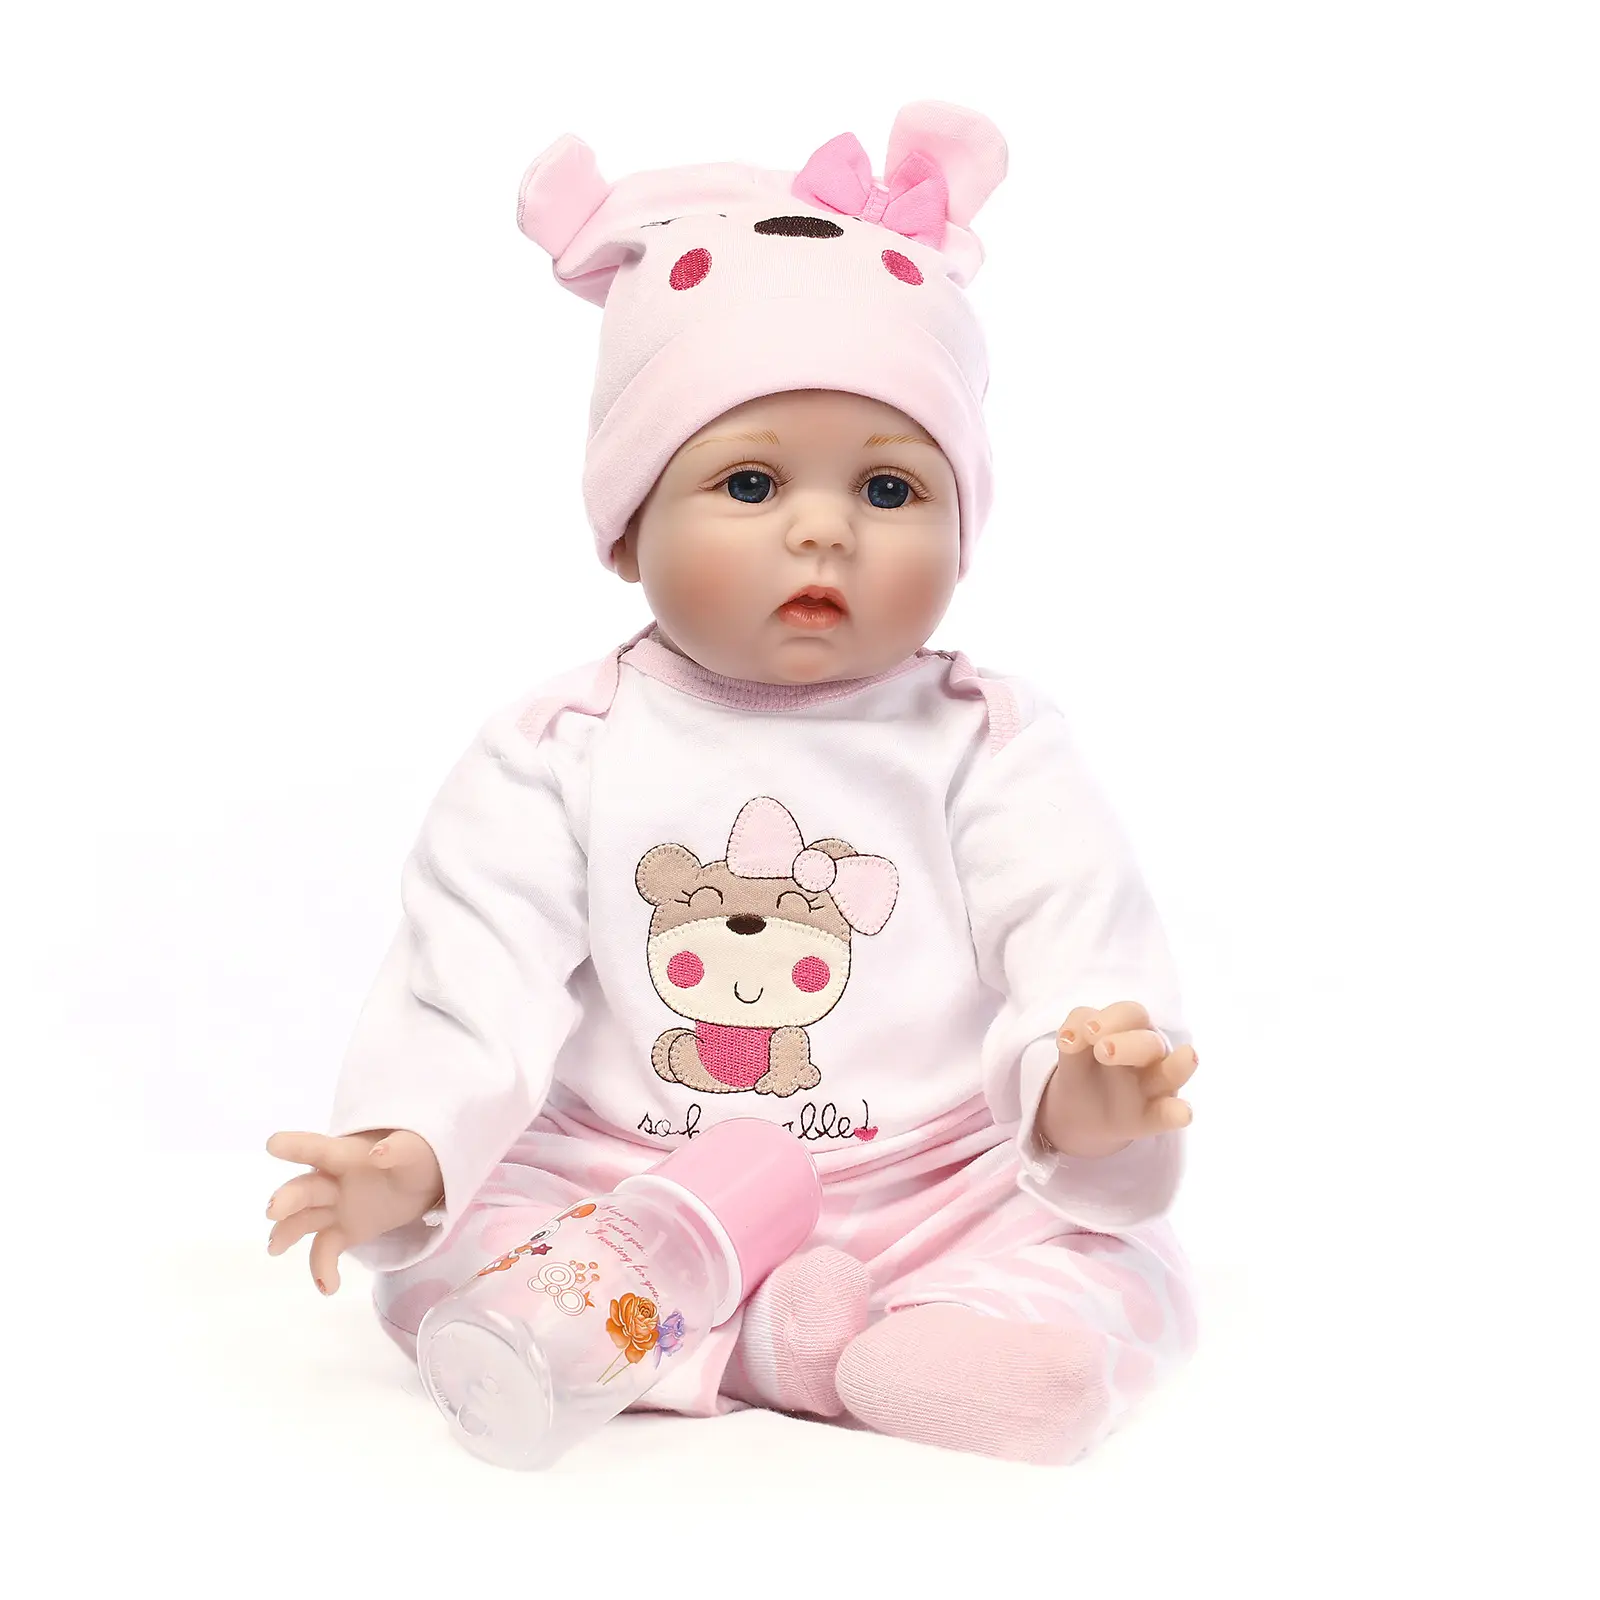 New hot products handmade toddler silicone reborn baby doll